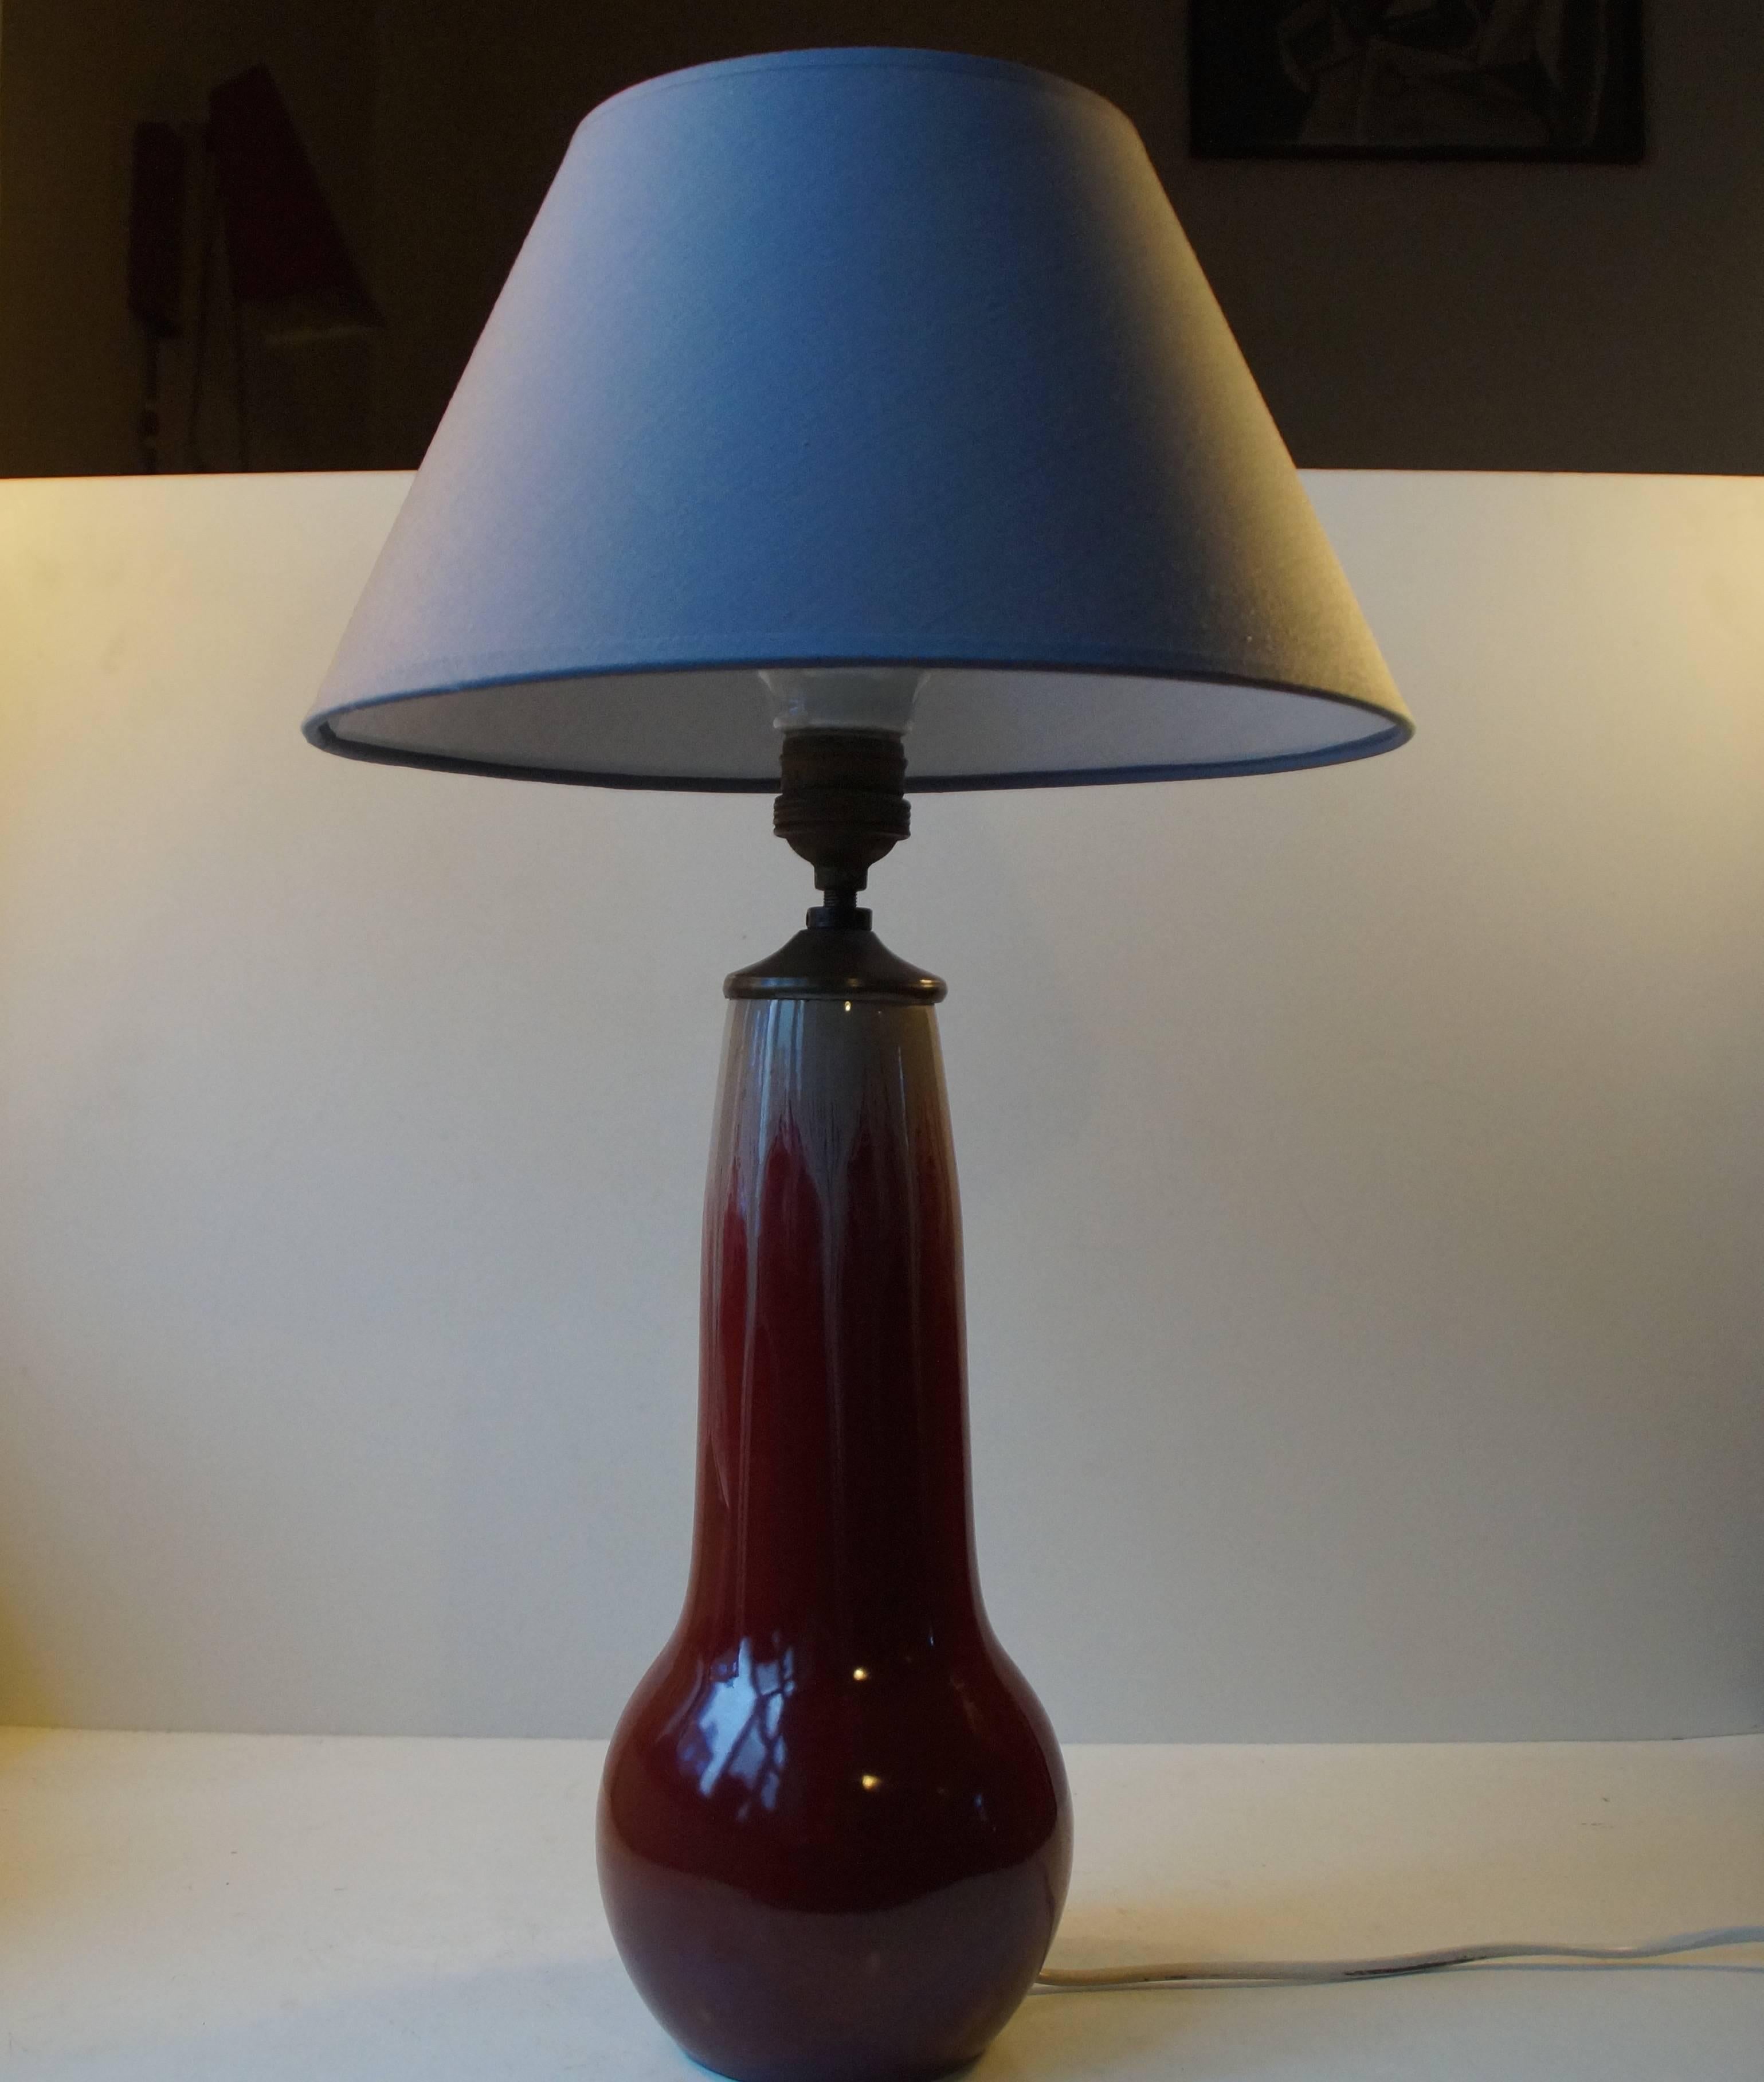 Early Danish modern stoneware table lamp form the 1930s - displaying exceptional techniques in glazes, subtle Art Nouveau styling and shape. Michael Andersen's son Daniel won the Goldmedal at the World's Fair in Brussel in 1935. This piece was